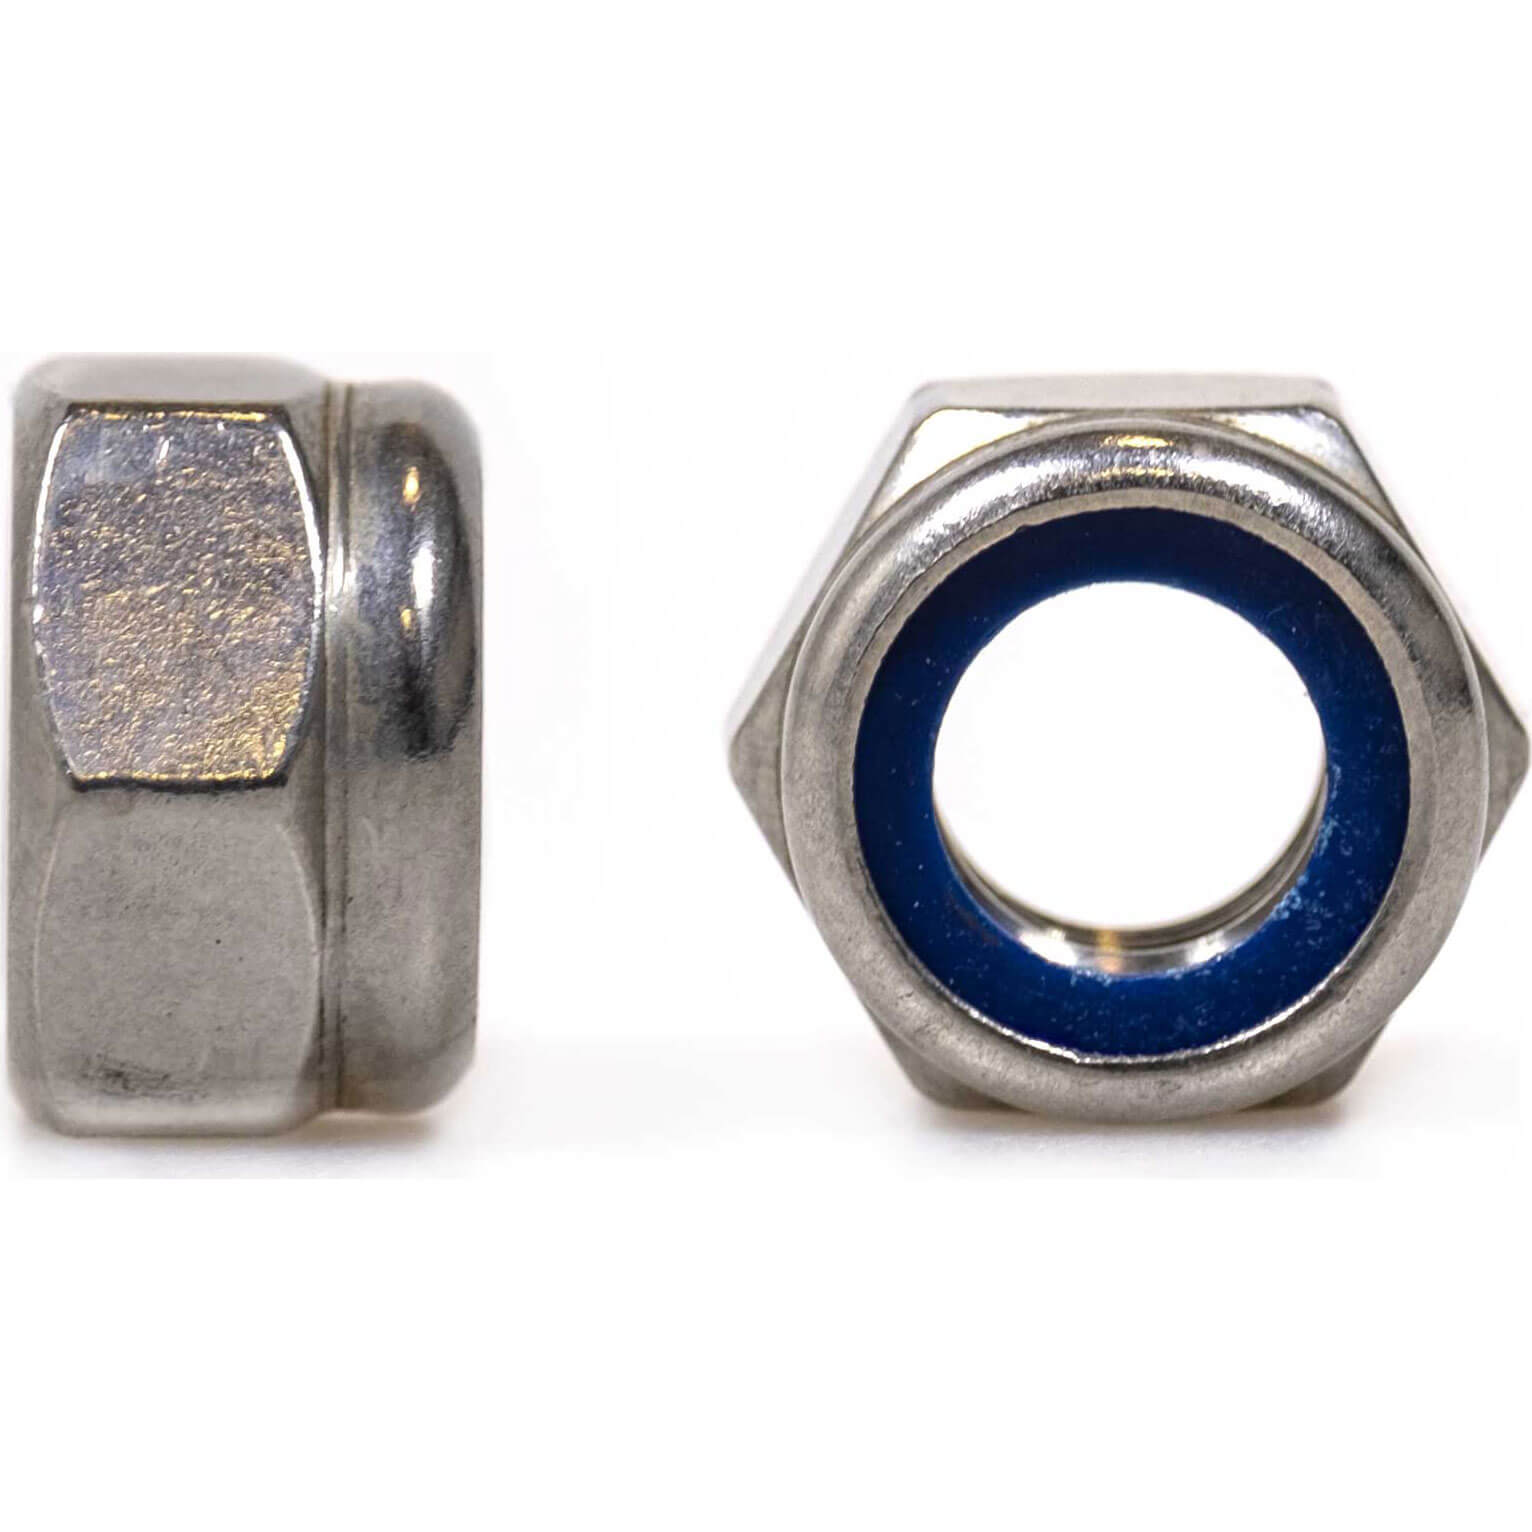 Image of Sirius A2 304 Stainless Steel Hexagon Lock Nuts M4